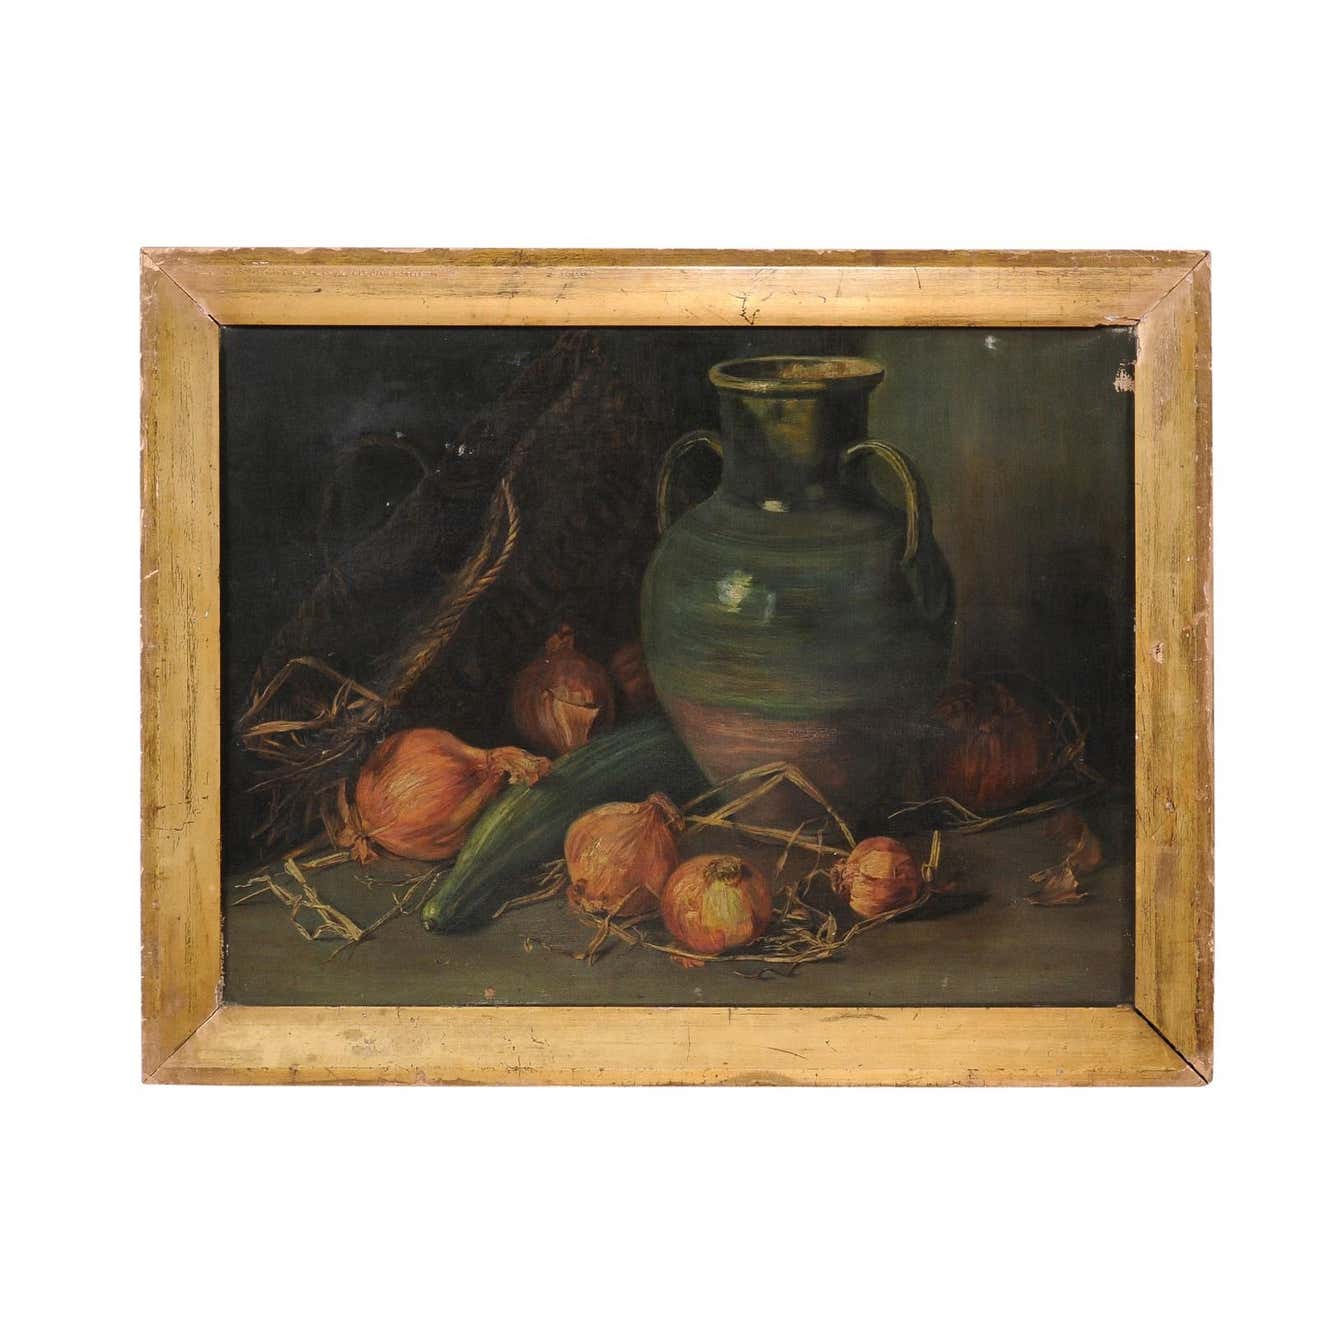 SOLD - English 1860s Framed Oil on Canvas Still-Life Painting by George Jackson